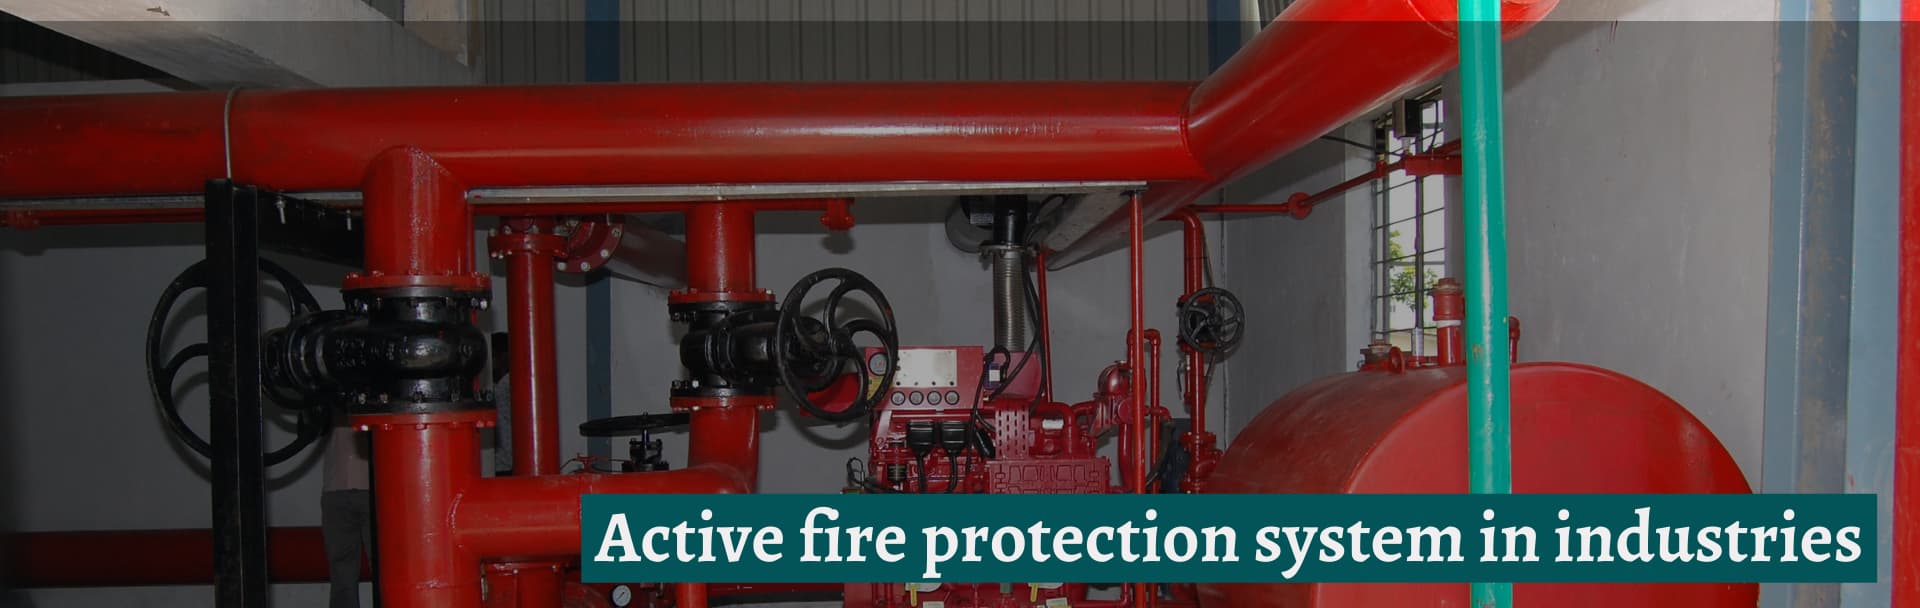 Industrial fire safety consultants